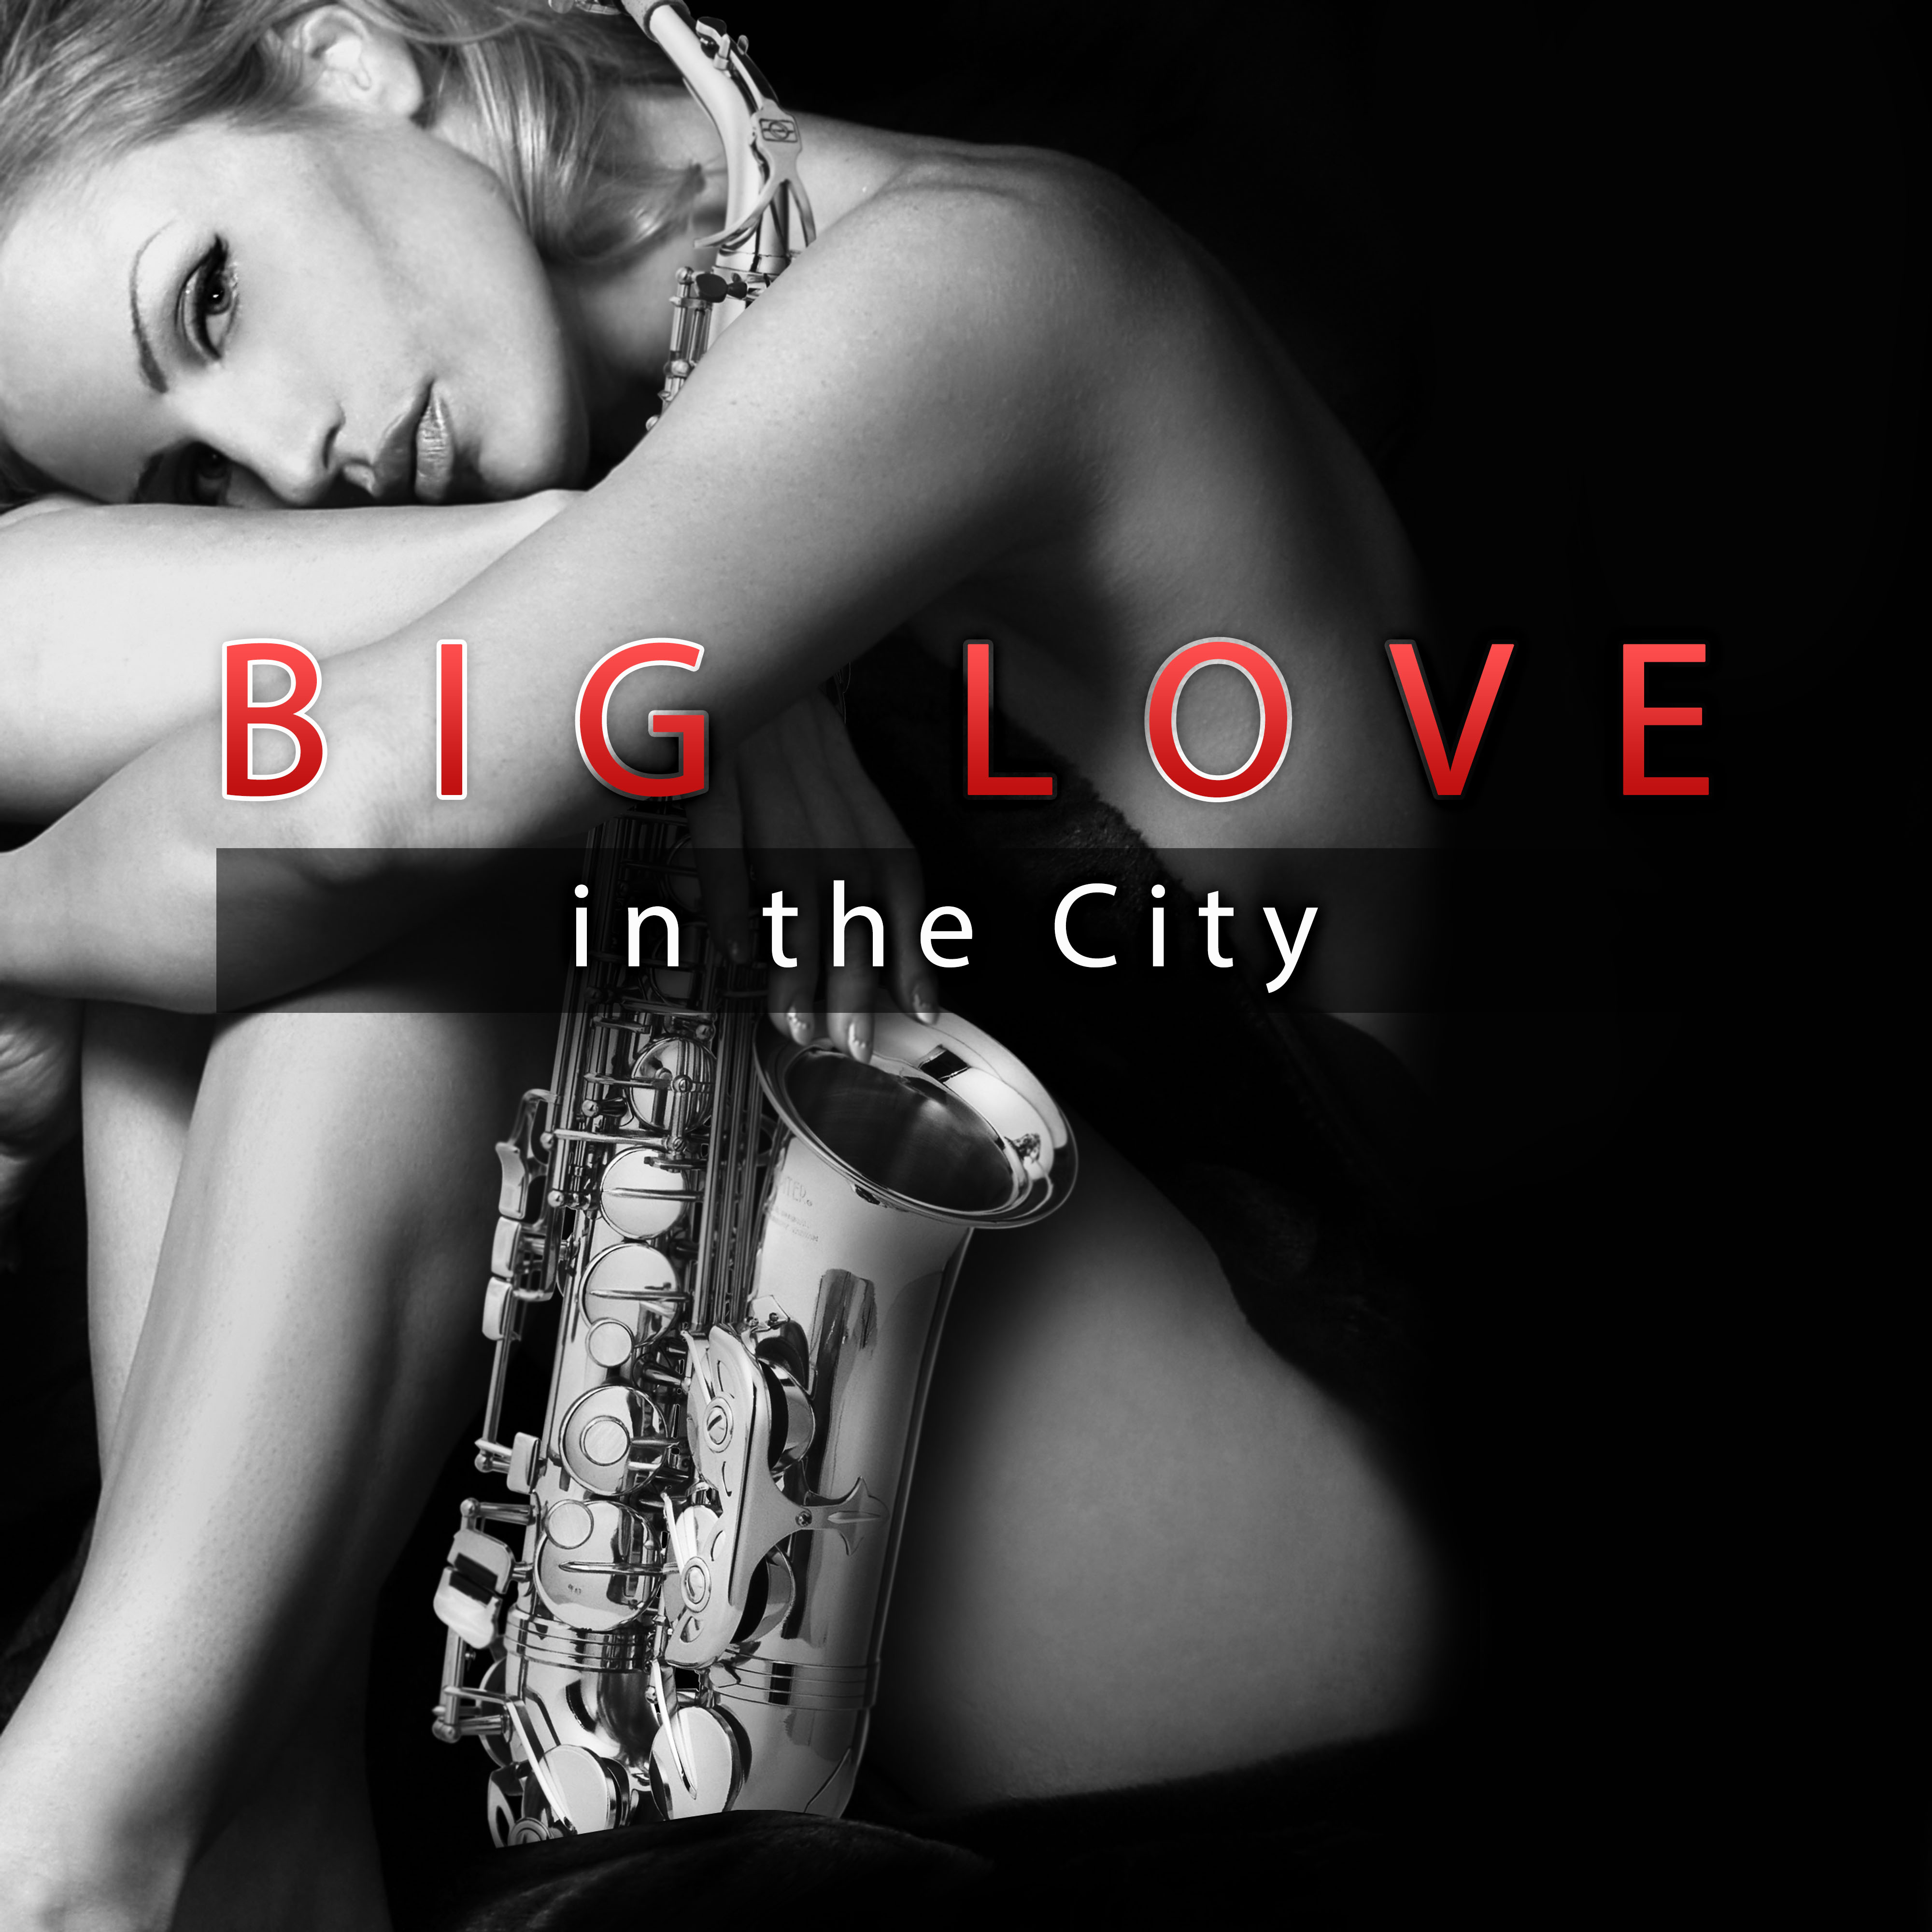 Big Love in the City – **** Vibes of Jazz, Sensual Music for Lovers, Special Date in Candlelight